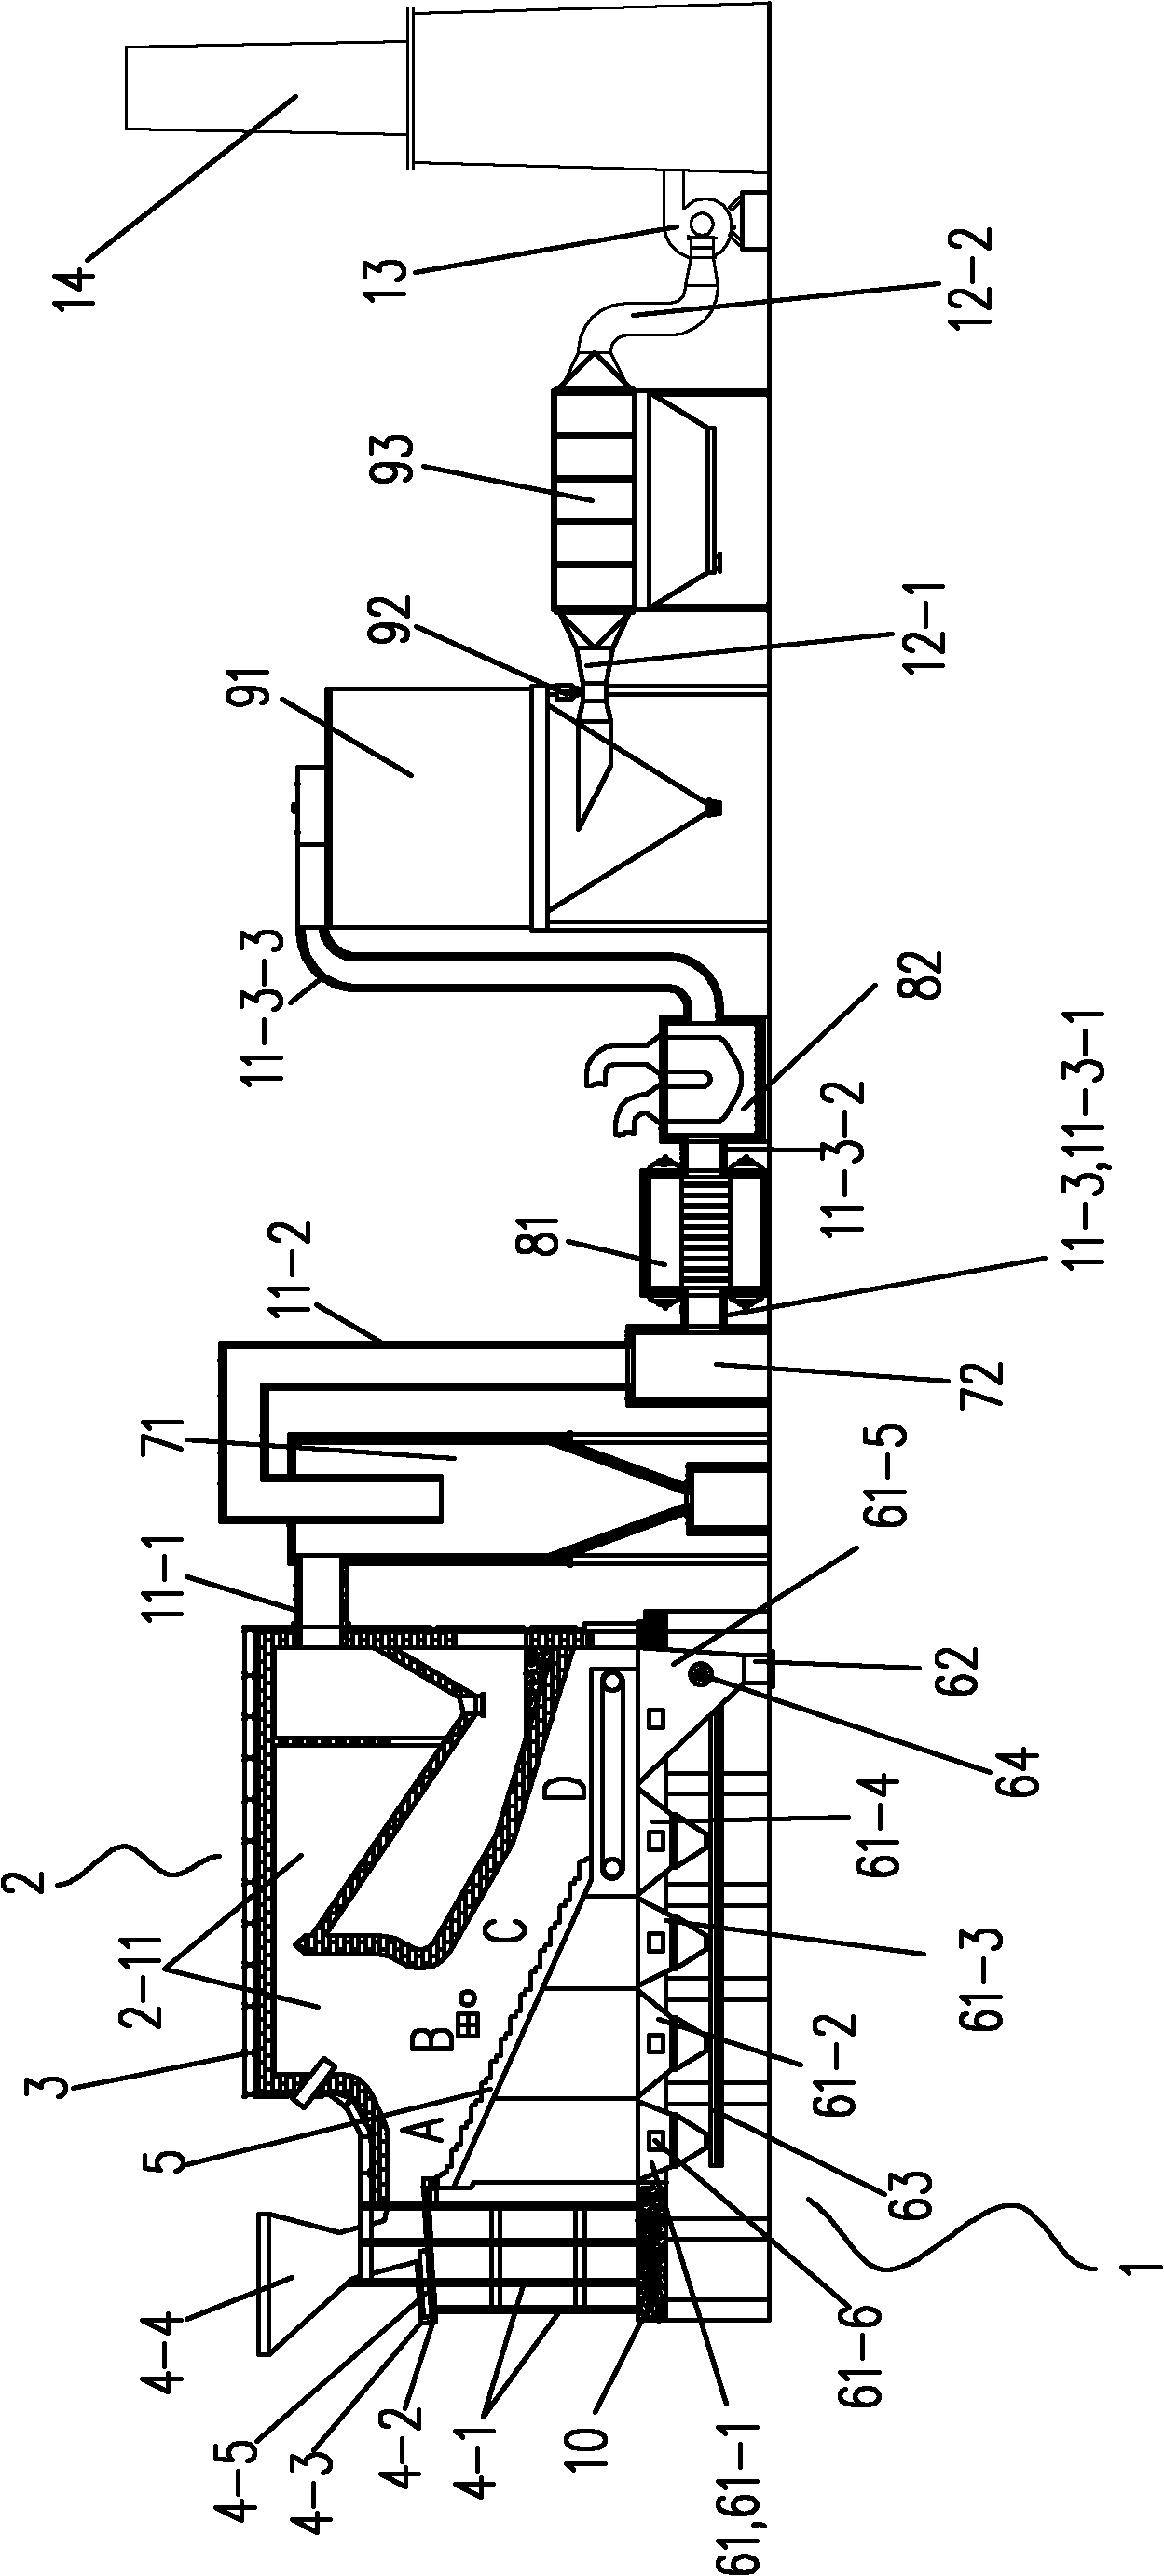 Household garbage incineration and flue gas processing system and method for processing household garbage